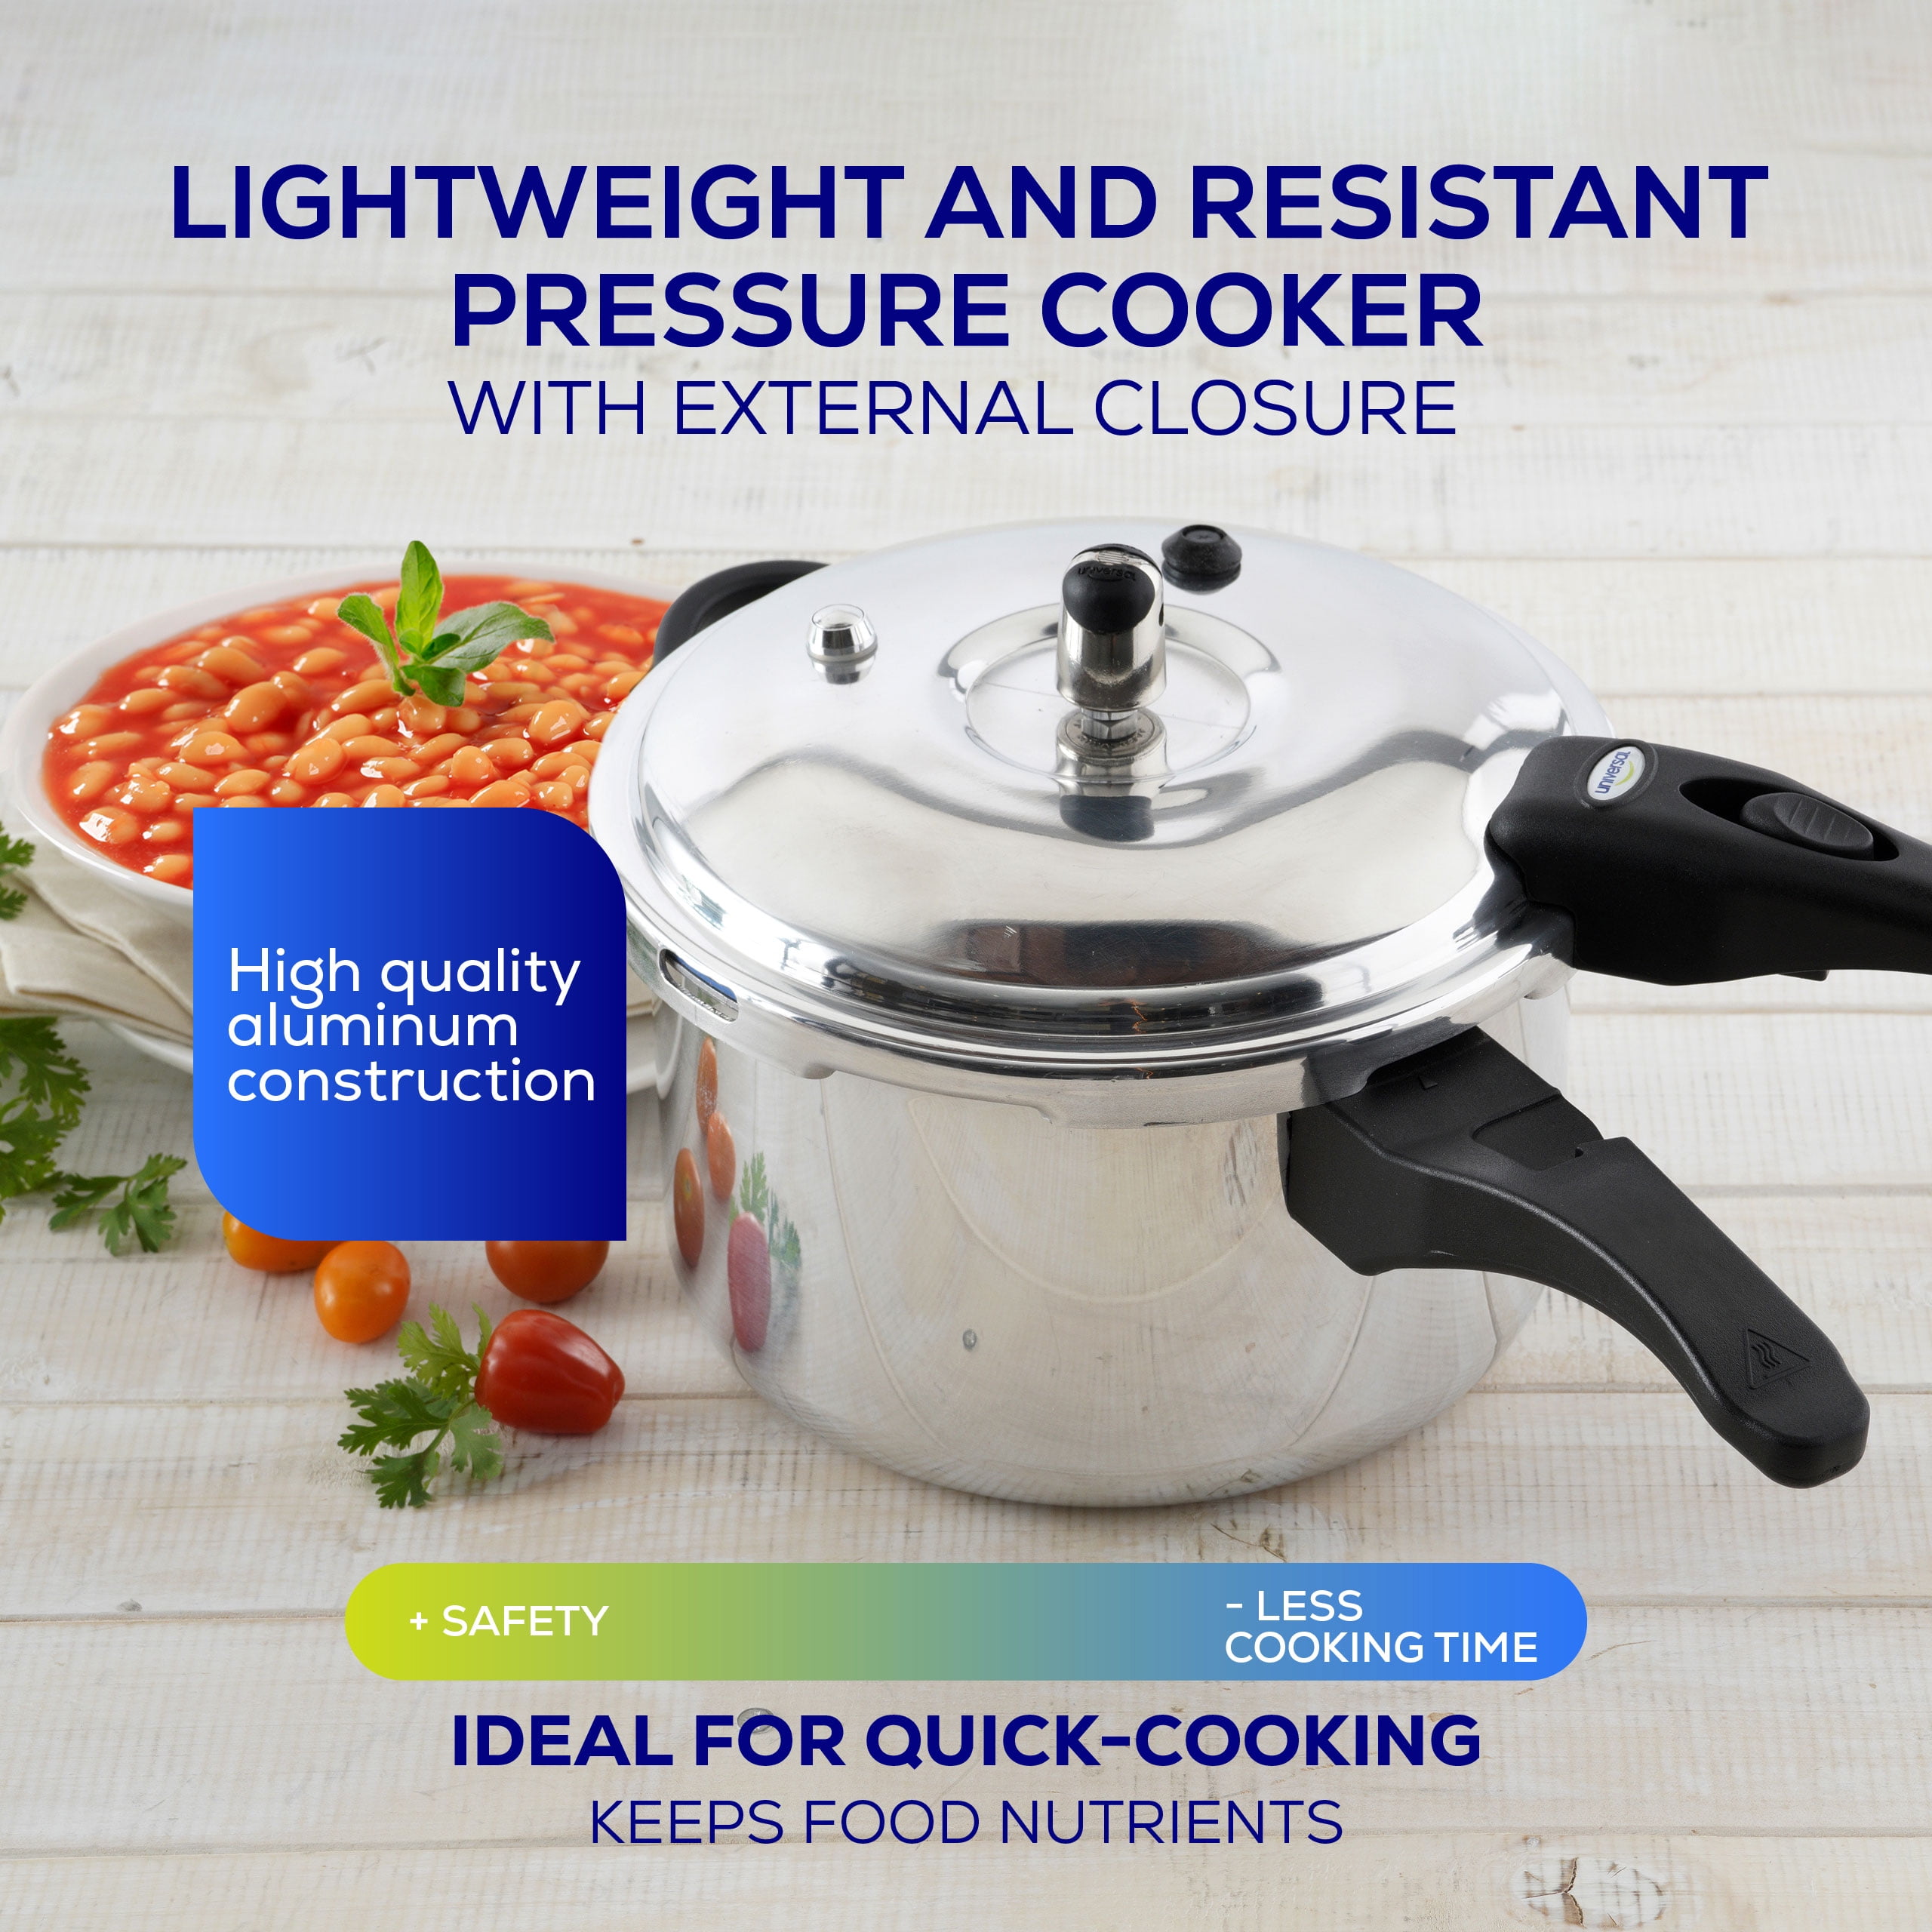 Universal 53QT / 50L Professional Pressure Cooker, Sturdy, Heavy-Duty Aluminum Construction with Multiple Safety Systems, Silver